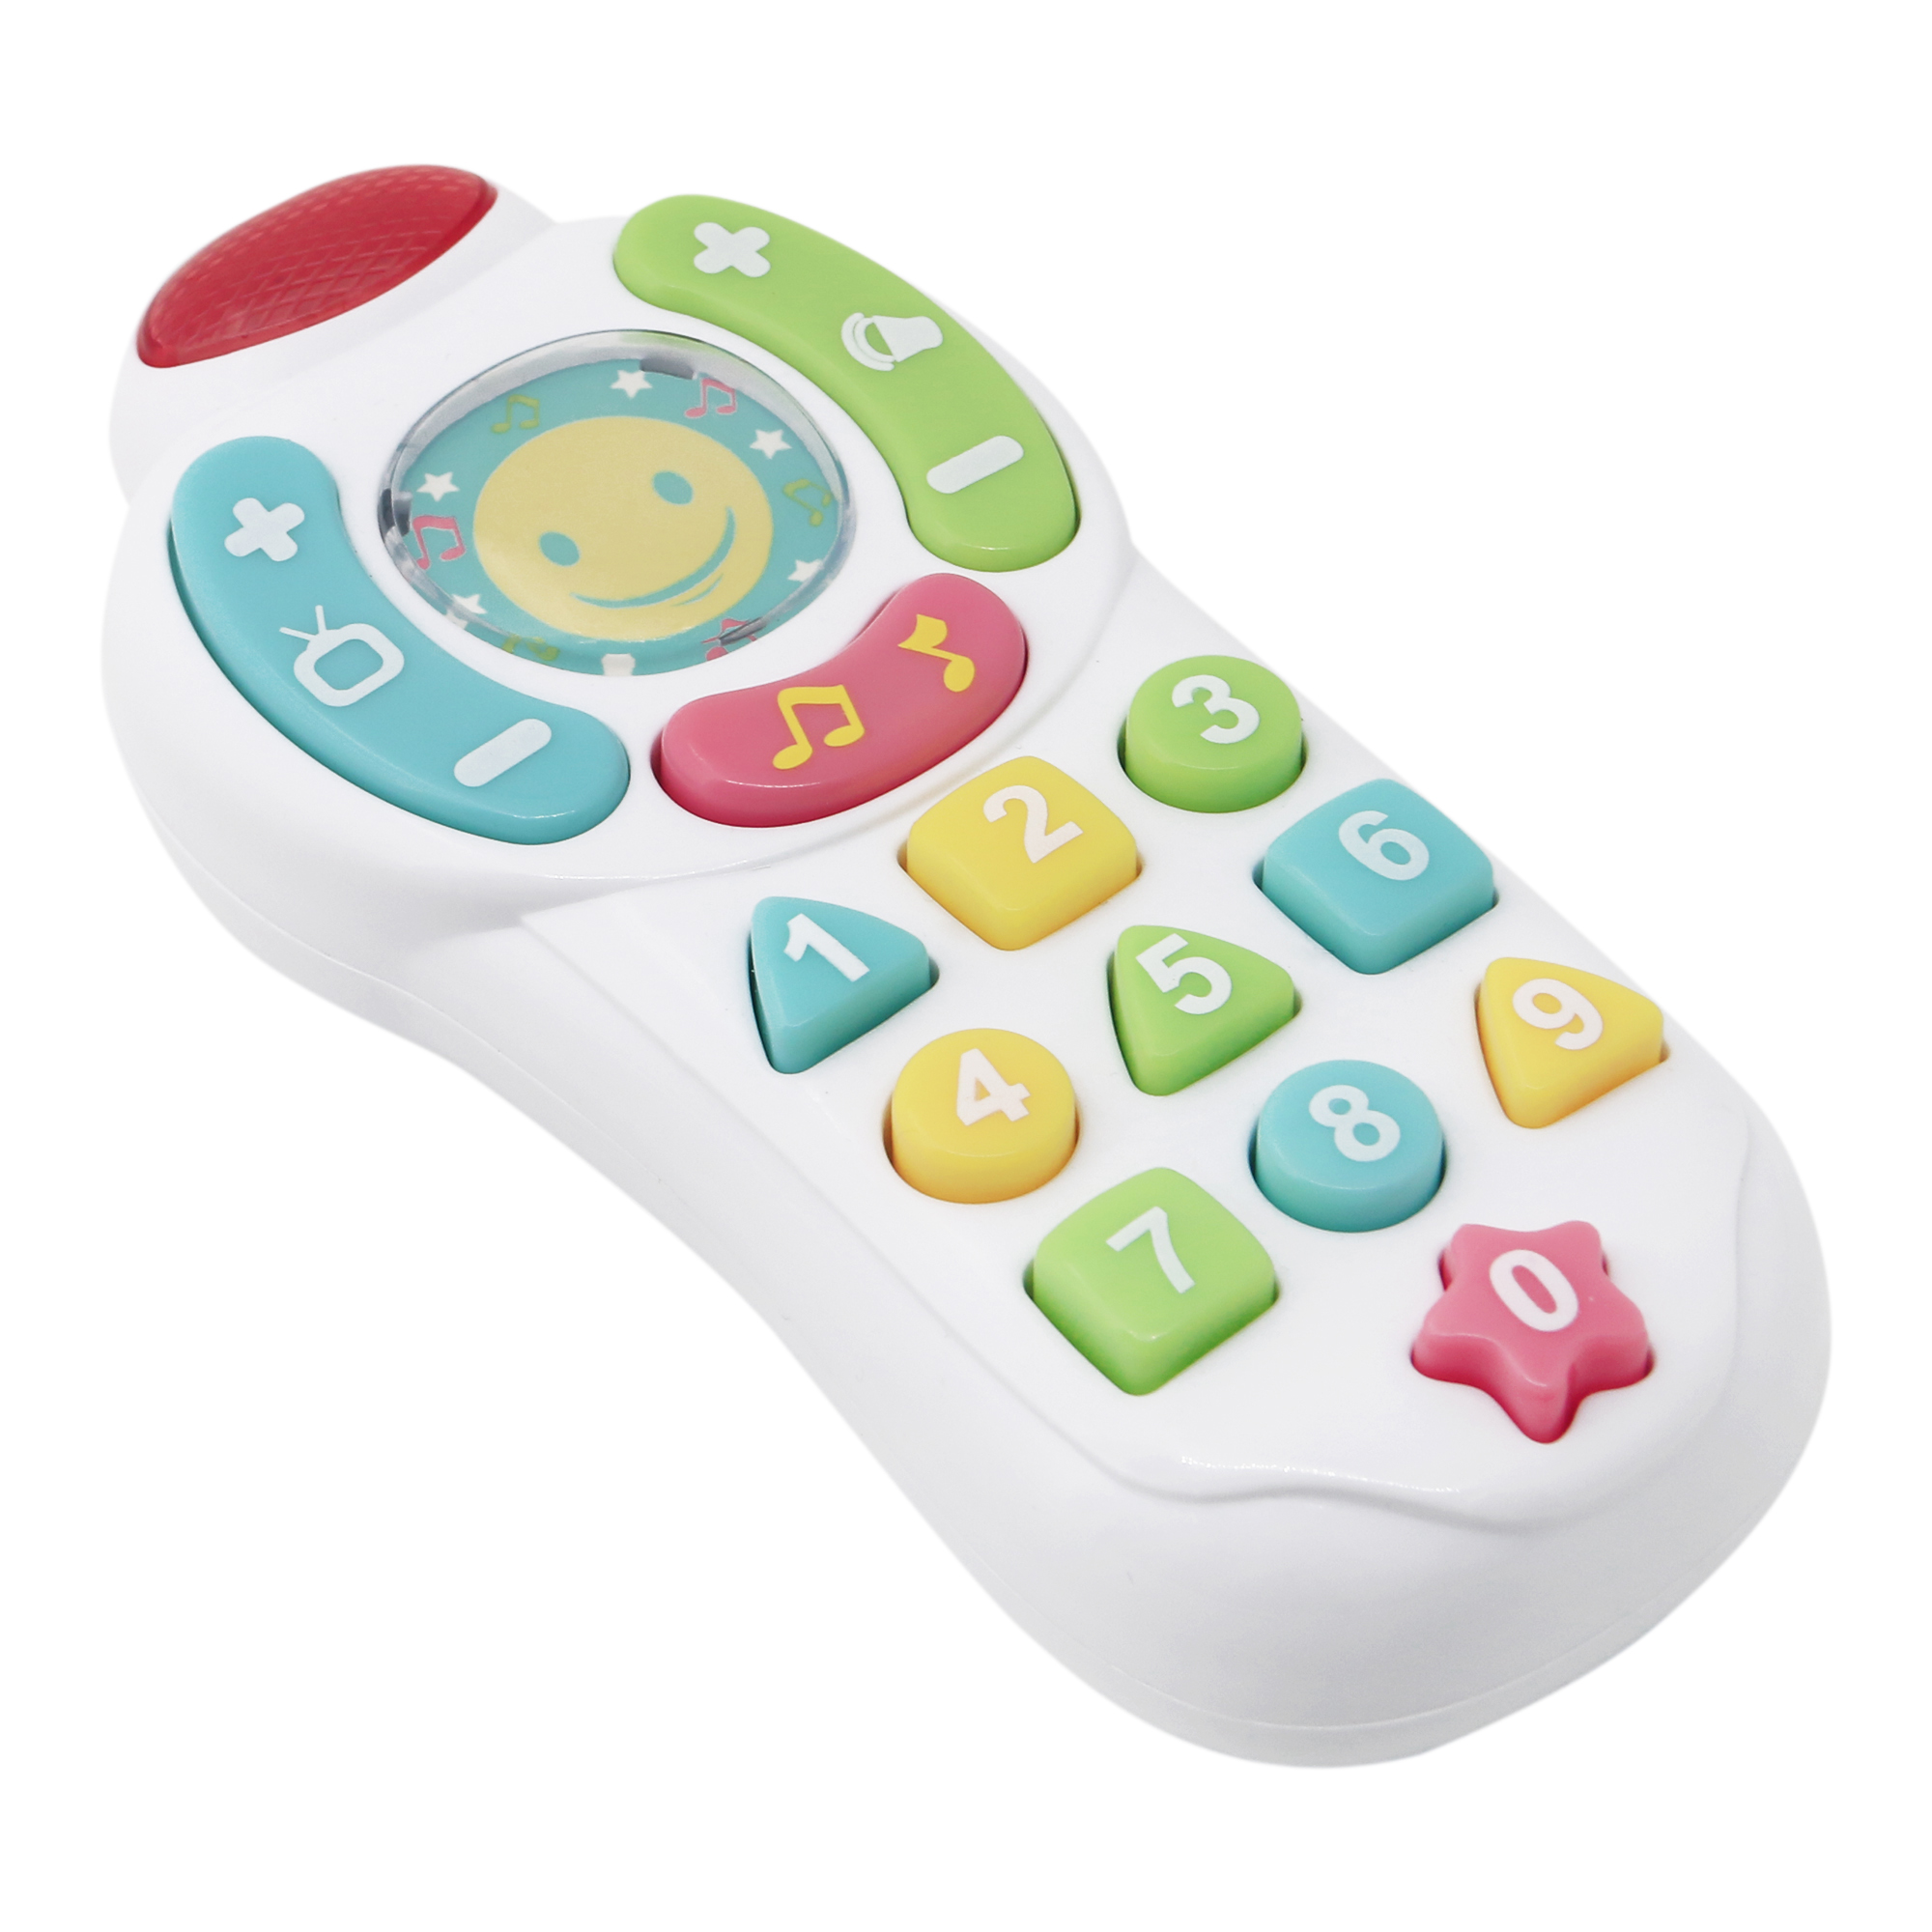 Spark Create Imagine Electronic Learning Remote Toddler Toy - image 4 of 10